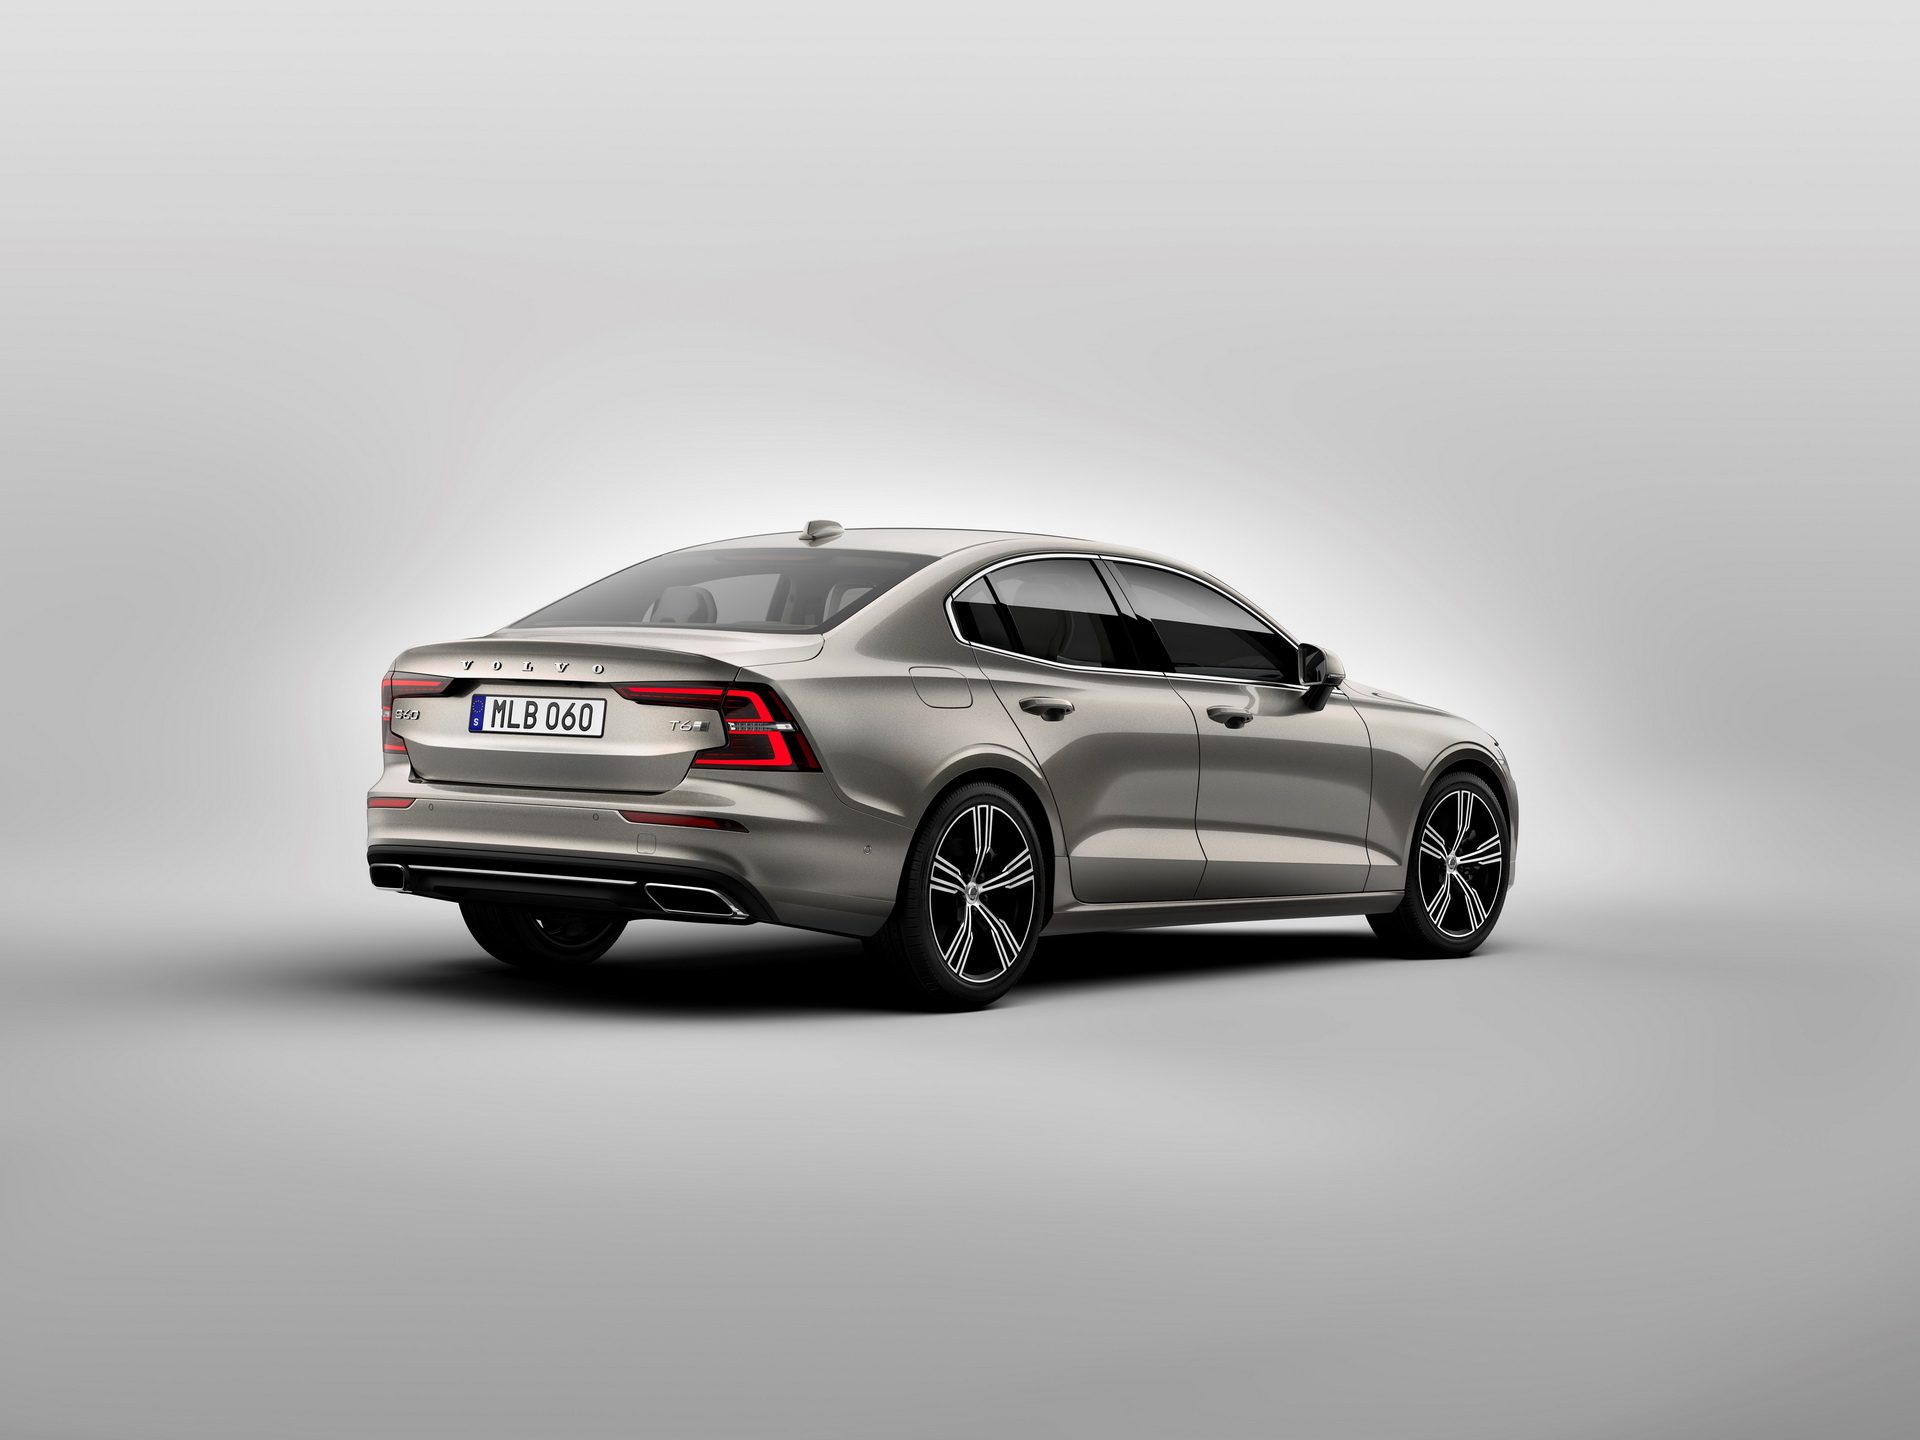 1bba84d7-2019-volvo-s60-unveiled-2.jpg